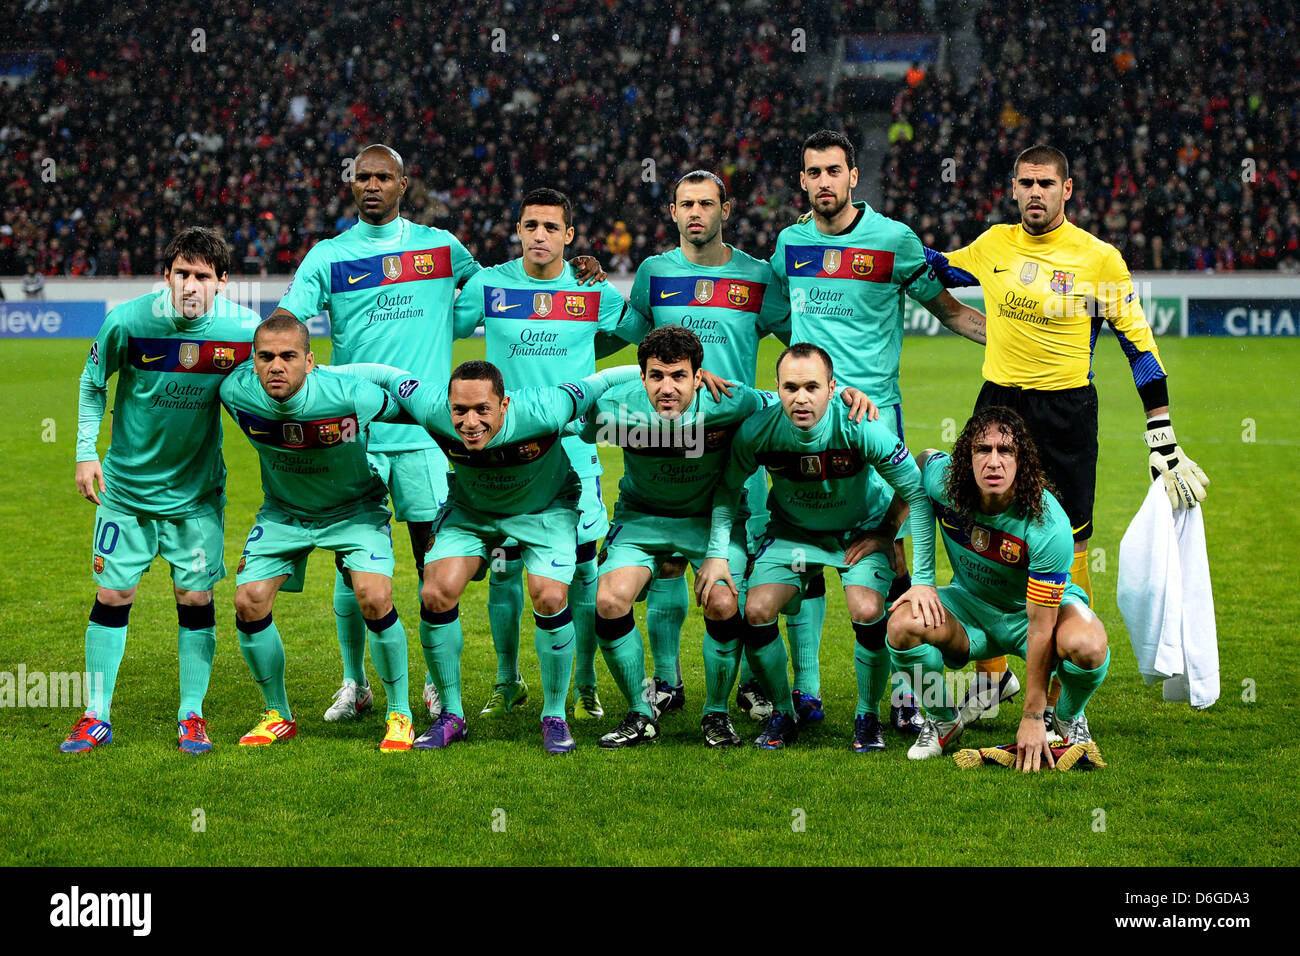 The team of FC Barcelona (back L-R) Éric Abidal, Adriano Correia, Javier Mascherano, Sergio Busquets, goalkeeper Víctor Valdés (front L-R) Lionel Messi, Daniel Alves, Alexis Sanchez, Cesc Fabregas, Andres Iniesta, Carles Puyol are pictured prior to the UEFA Champions League match between Bayer Leverkusen and FC Barcelona at the BayArena in Leverkusen, Germany, 14 February 2012. Pho Stock Photo